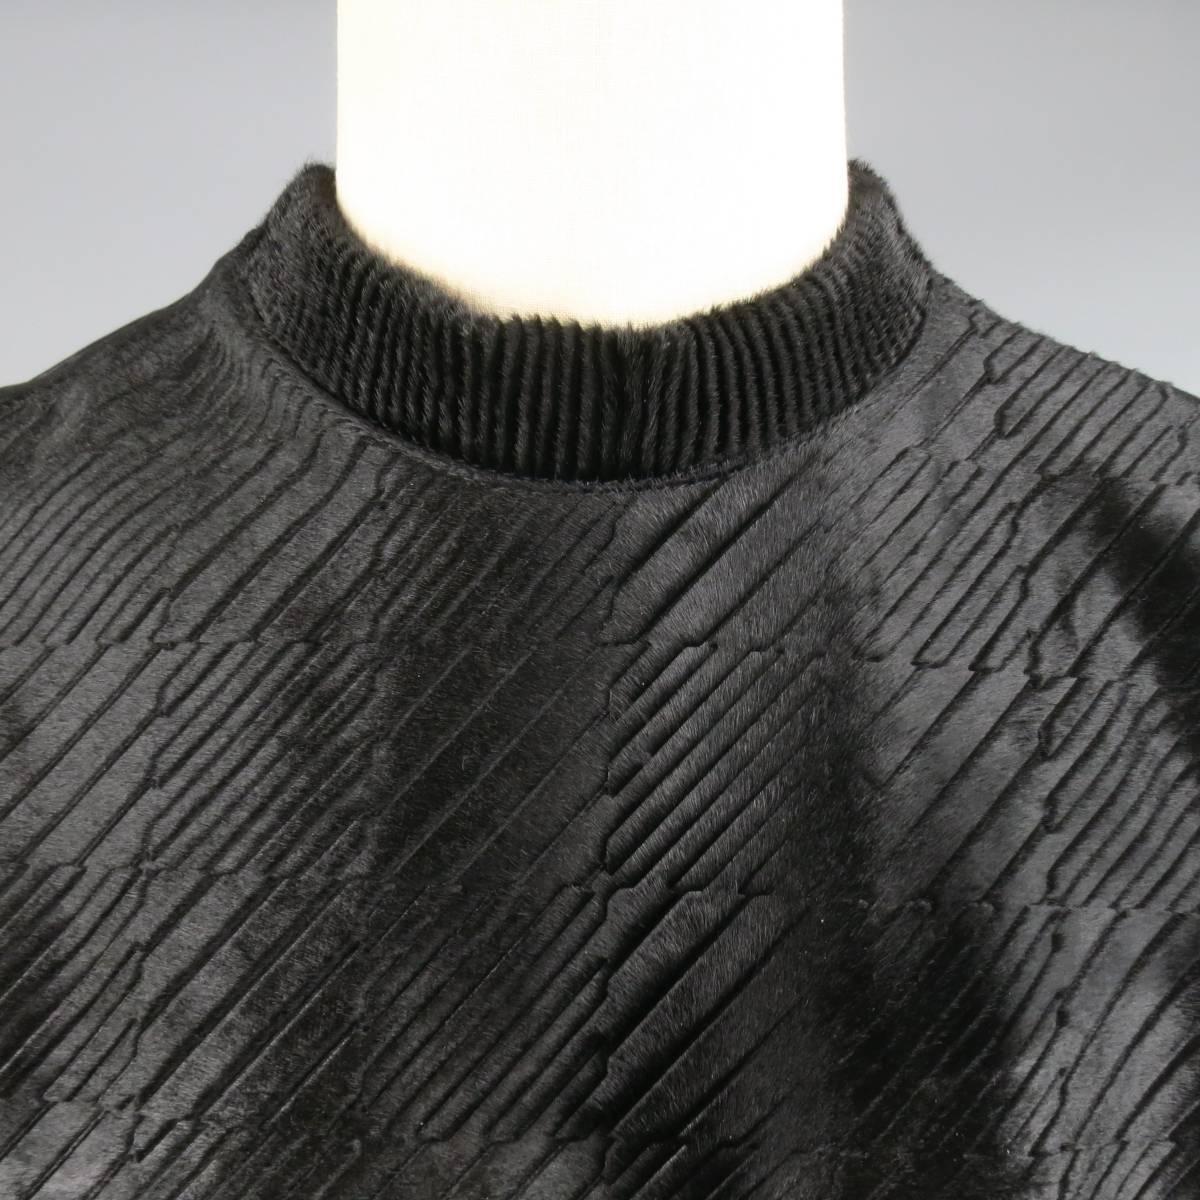 Calvin Klein Collection Men's pullover in a modern houndstooth embossed structured pony hair leather featuring thick ribbed cuffs and a high crewneck with zip closure. Made in Italy.
 
Good Pre-Owned Condition.
Marked: 48/38
 
Measurements:
